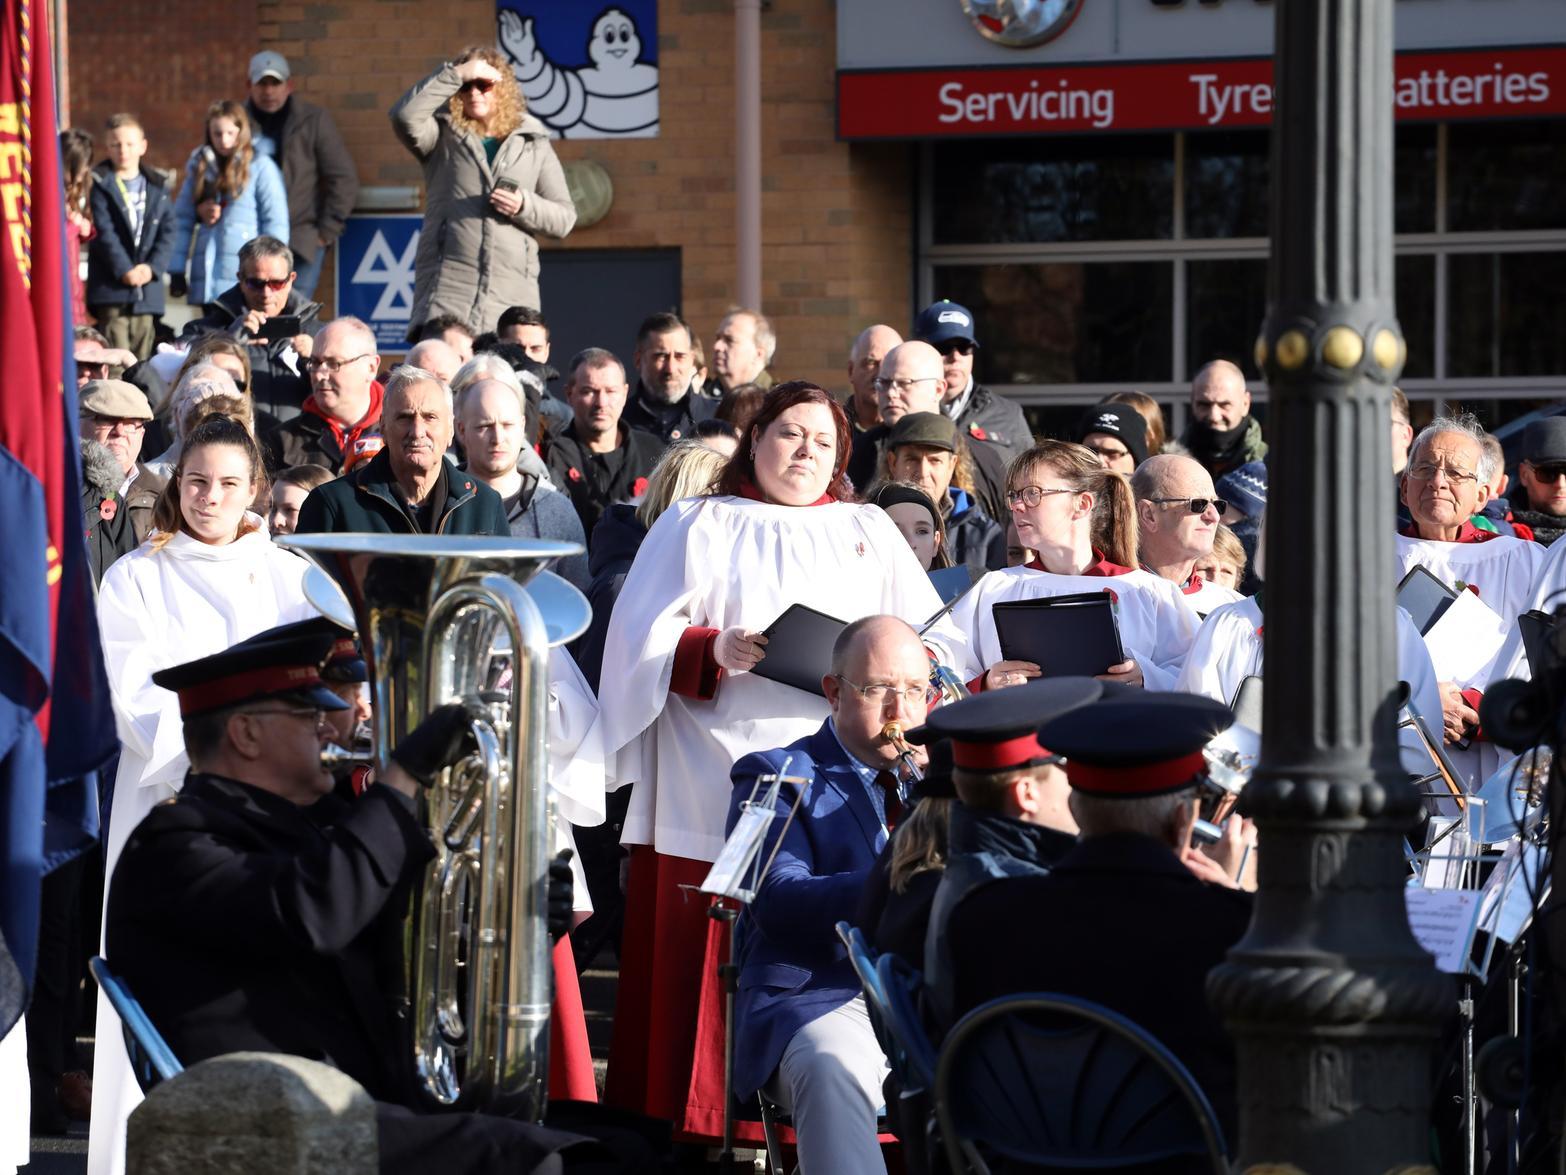 The band of the Salvation Army provided the music for the service